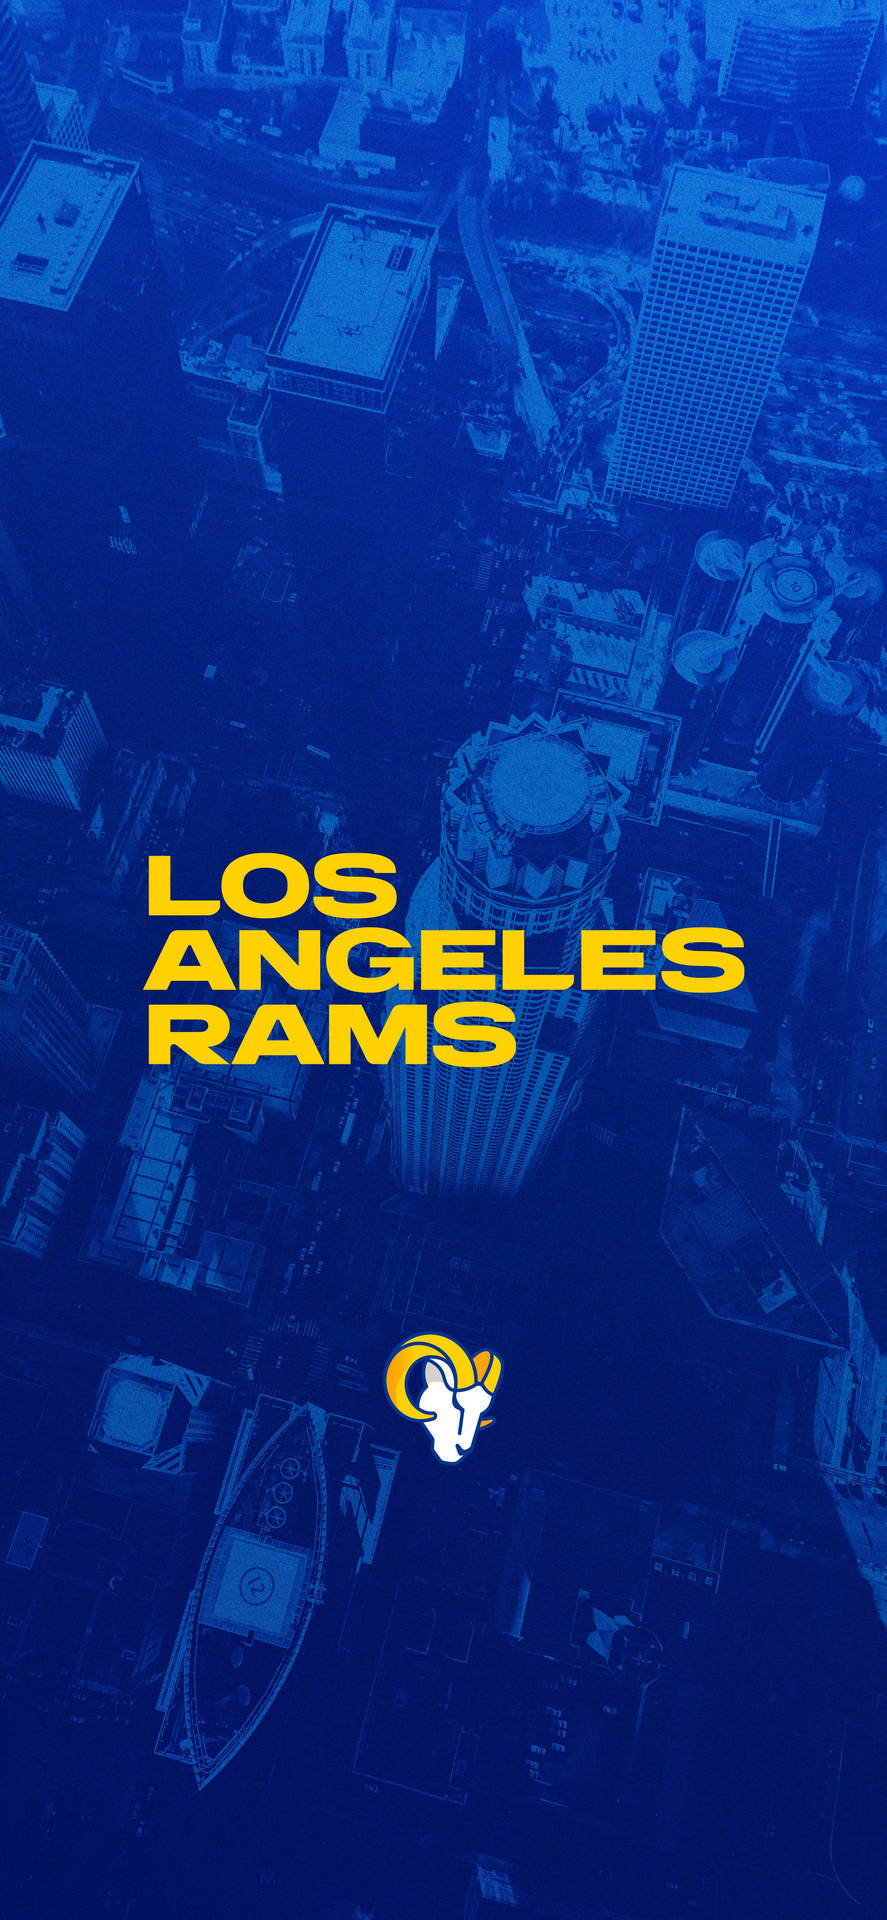 Los Angeles Rams Gold & Blue Background